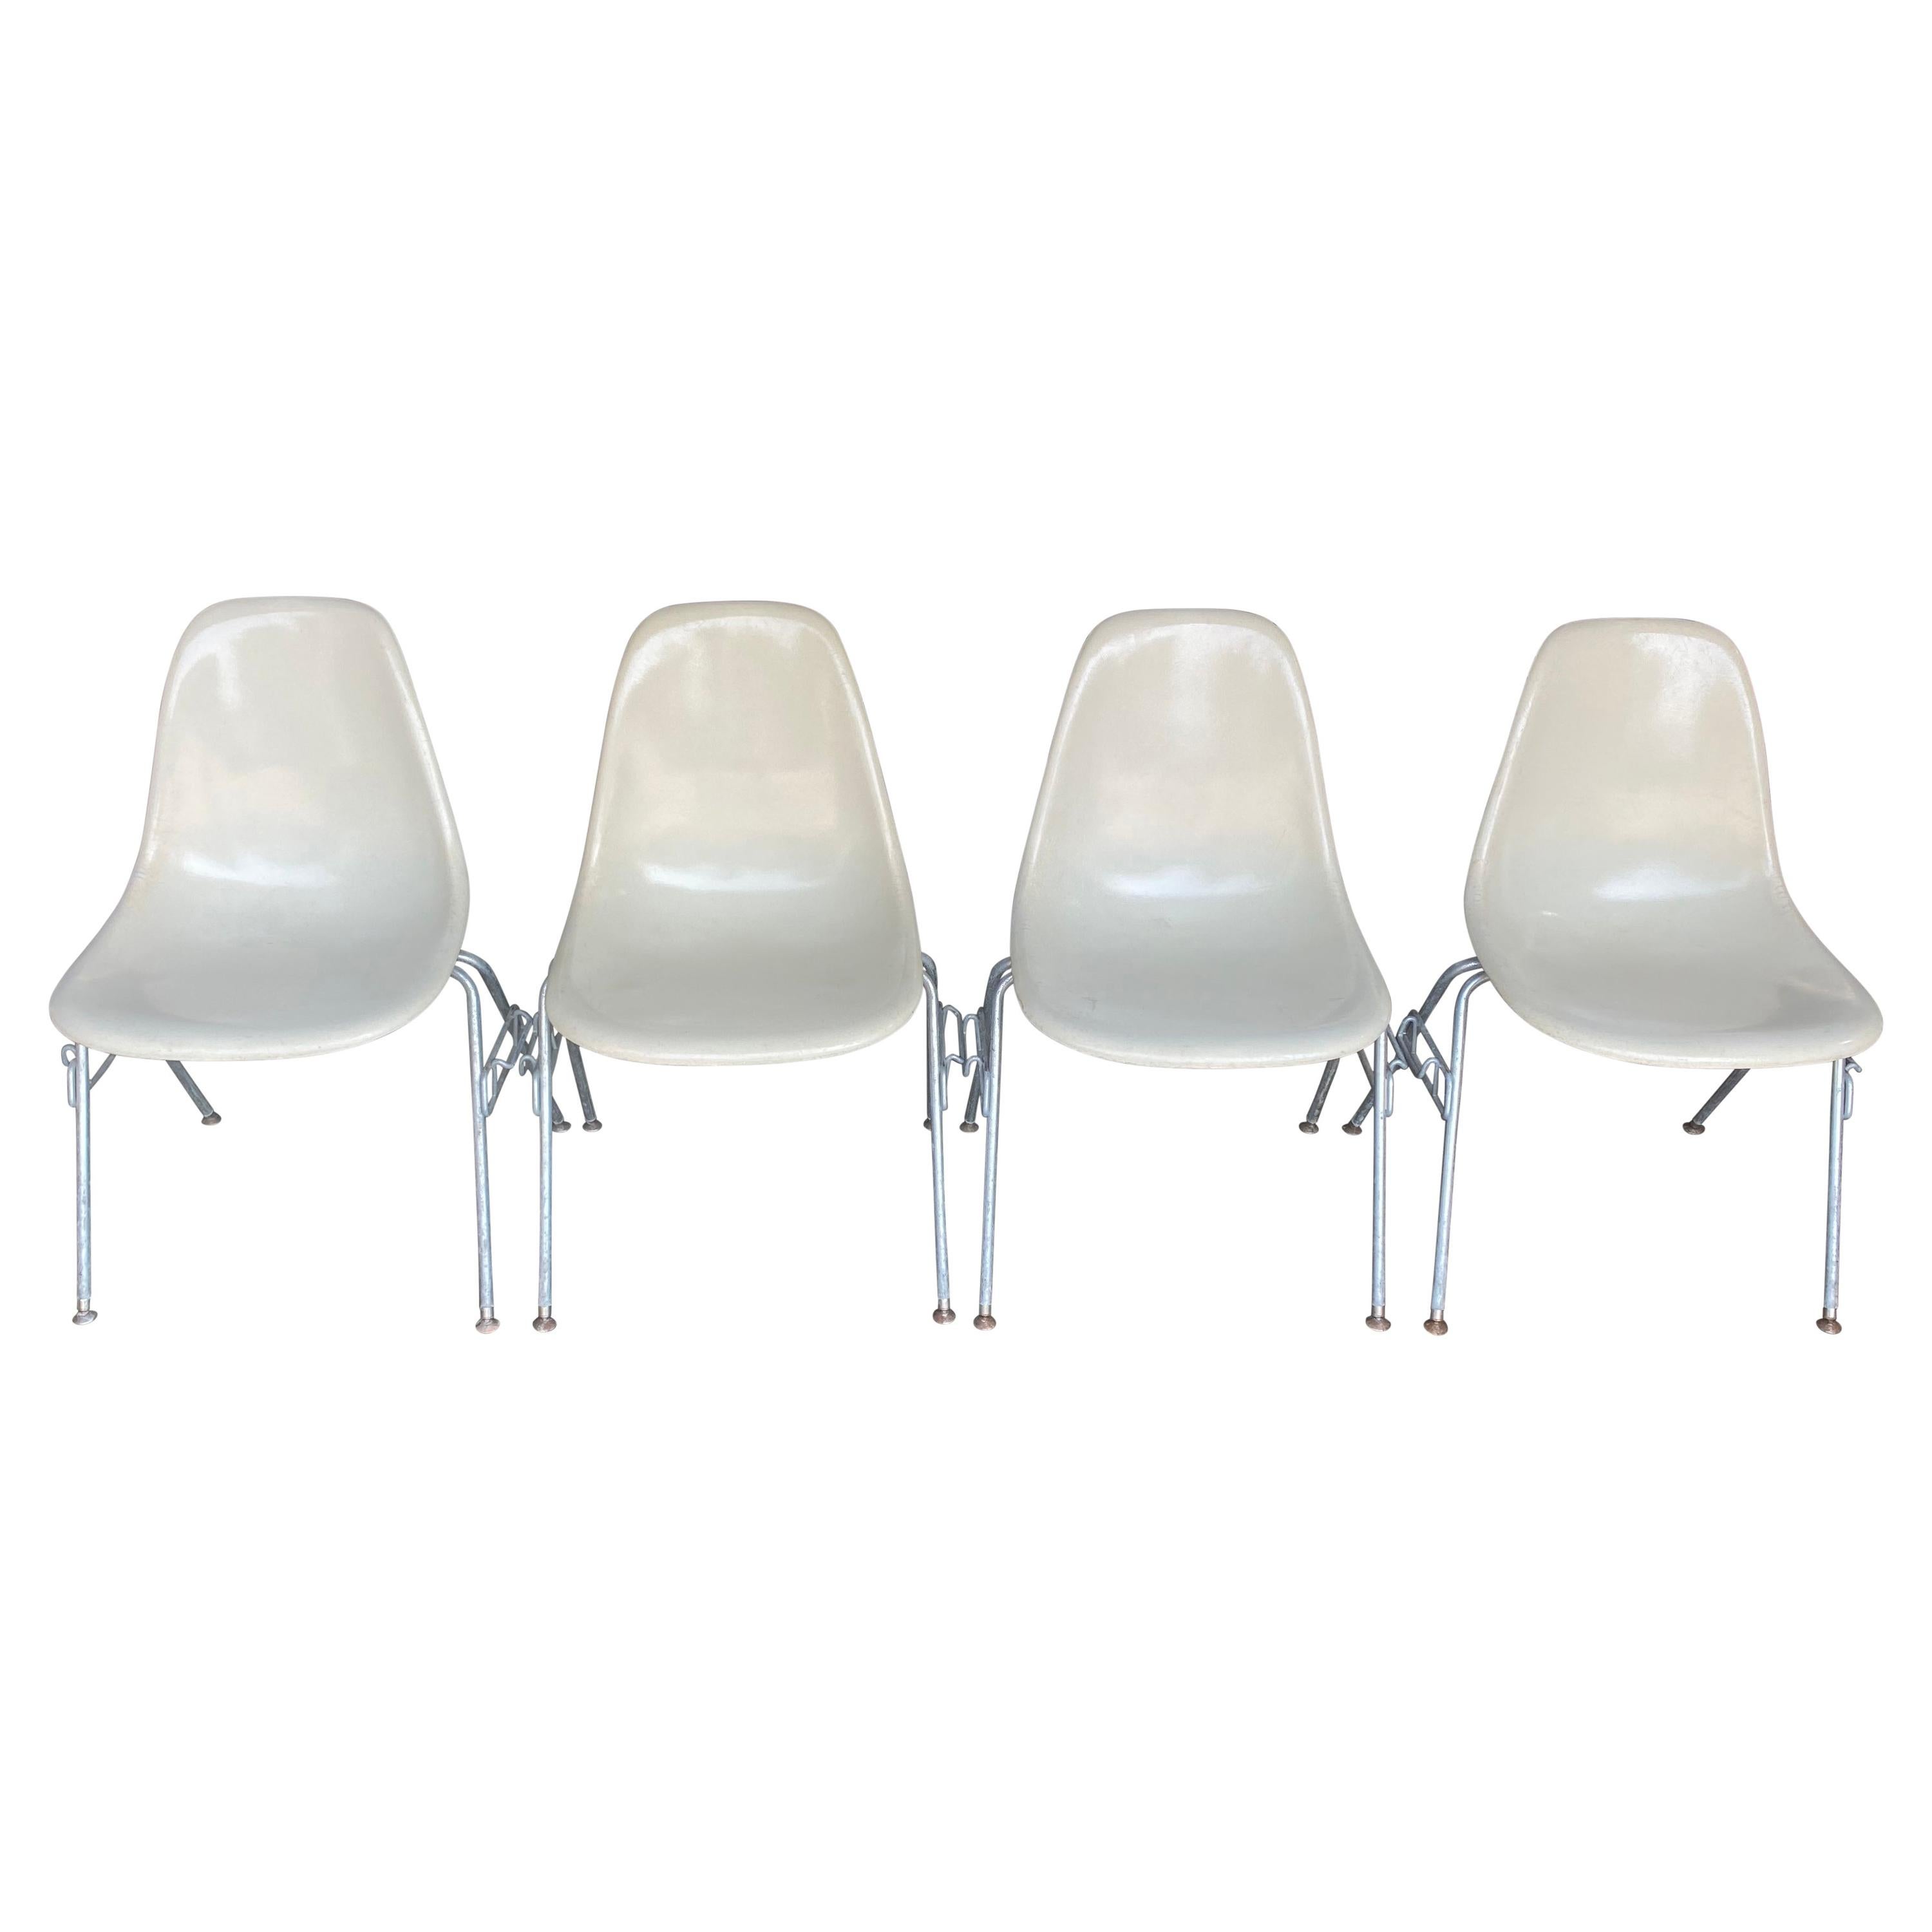 Four Herman Miller Eames Fiberglass Stacking Dining Chairs For Sale